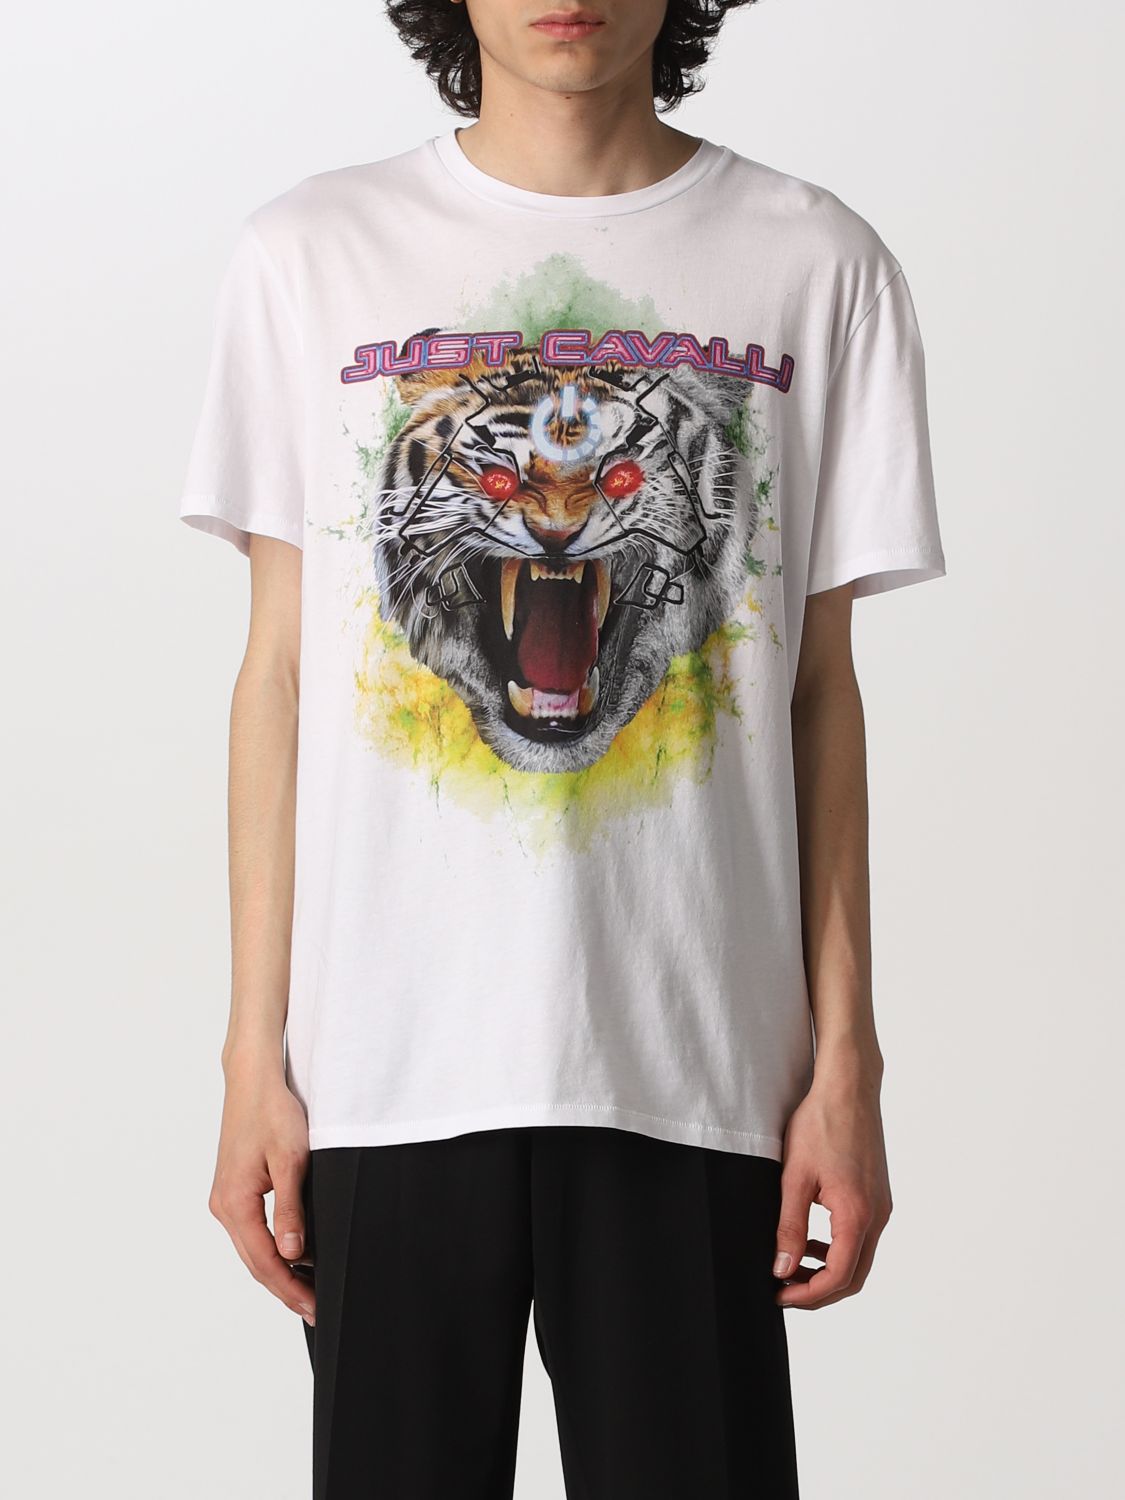 JUST CAVALLI T-SHIRT WITH GRAPHIC PRINT,C82083001